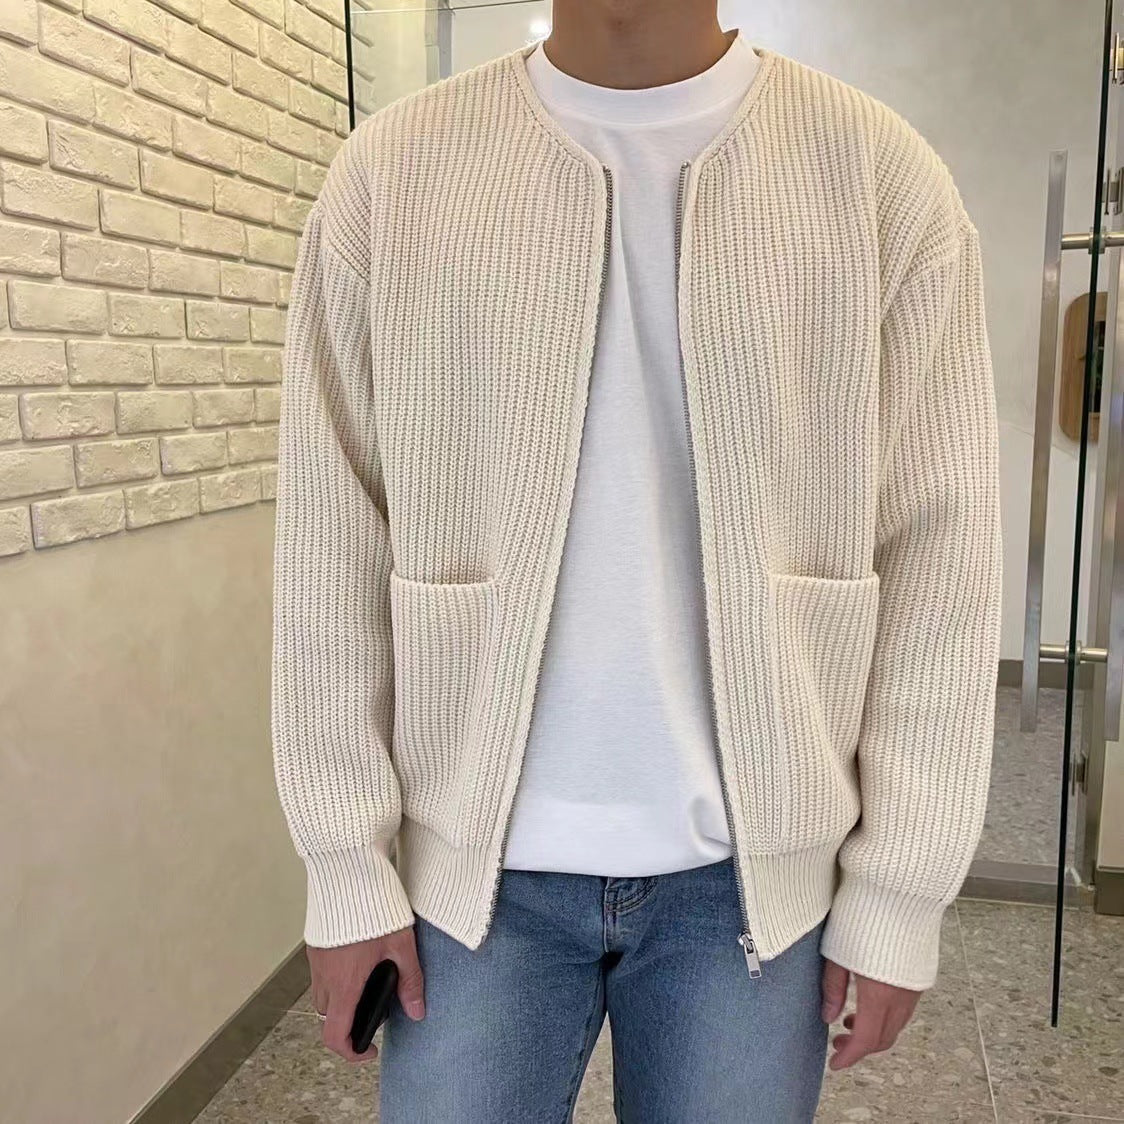 Men's Fashion Trendy Knitted Cardigan Sweater